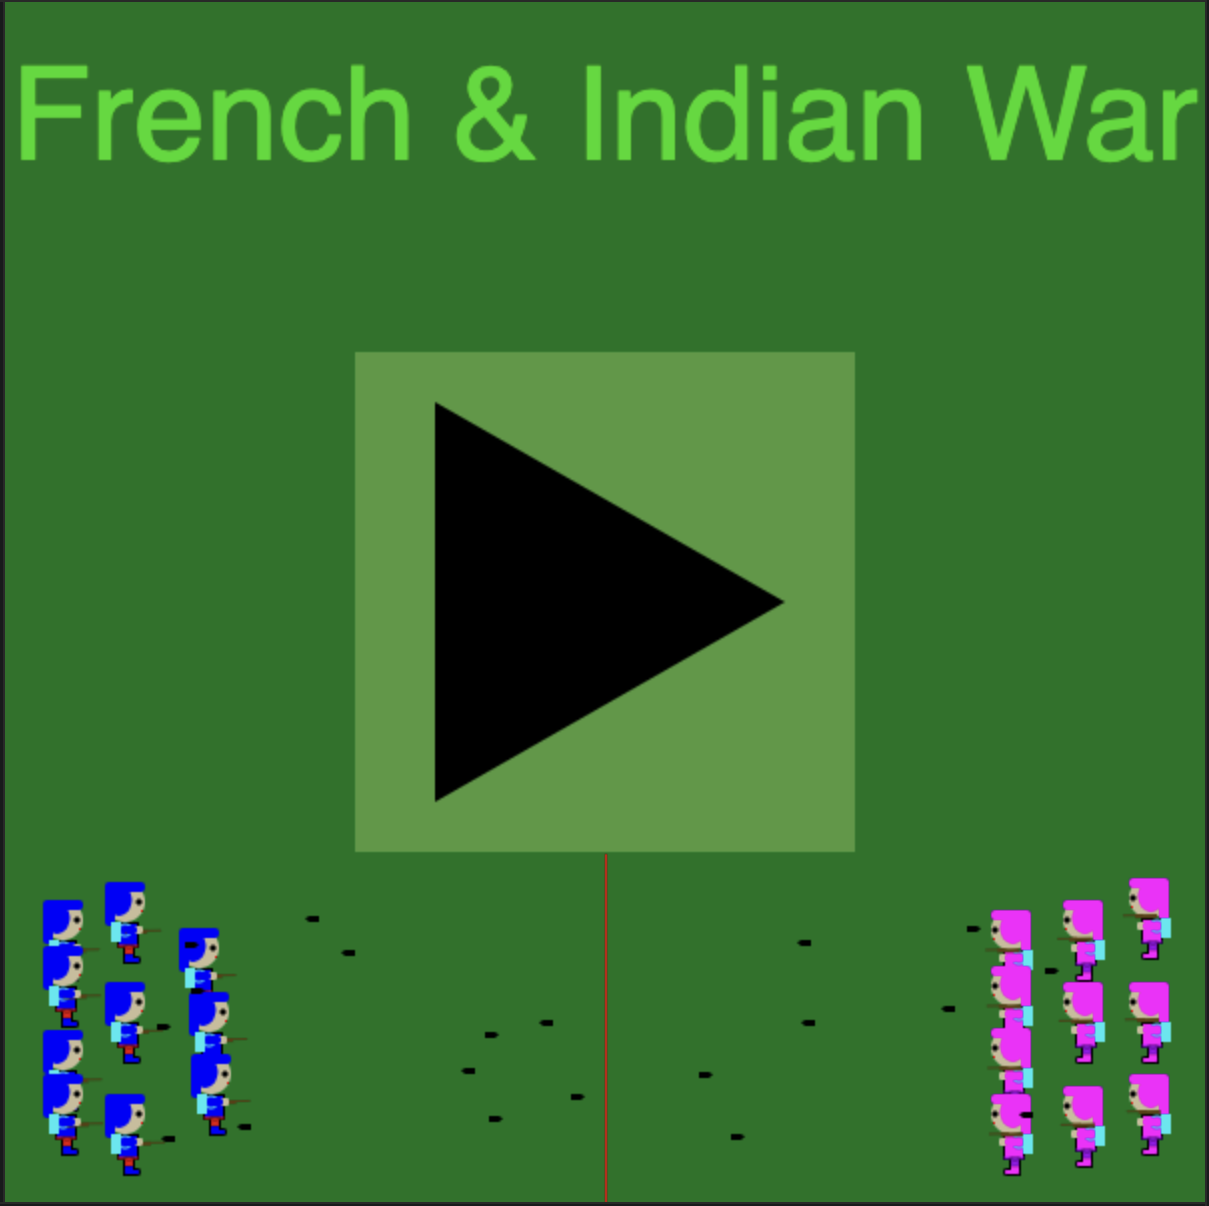 picture from my game about the French and Indian War